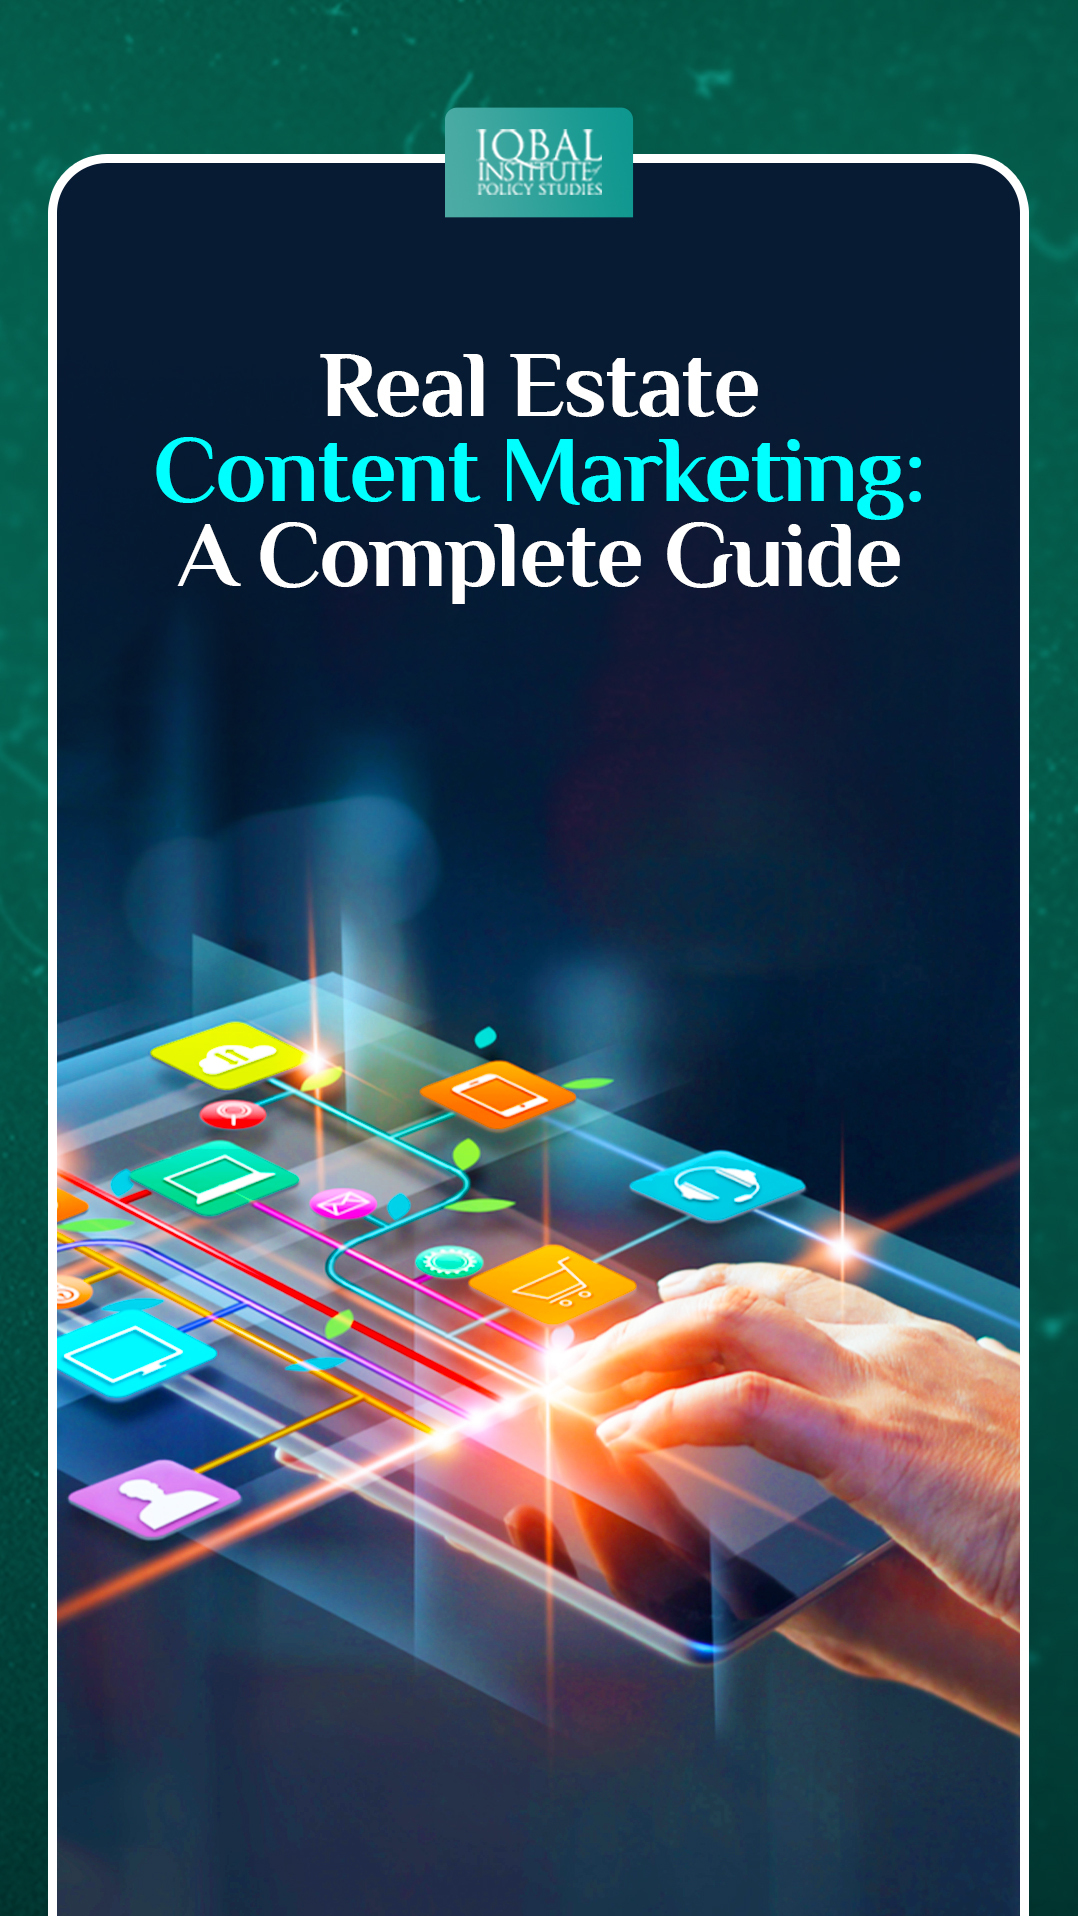 Real Estate Content Marketing: A Complete Guide